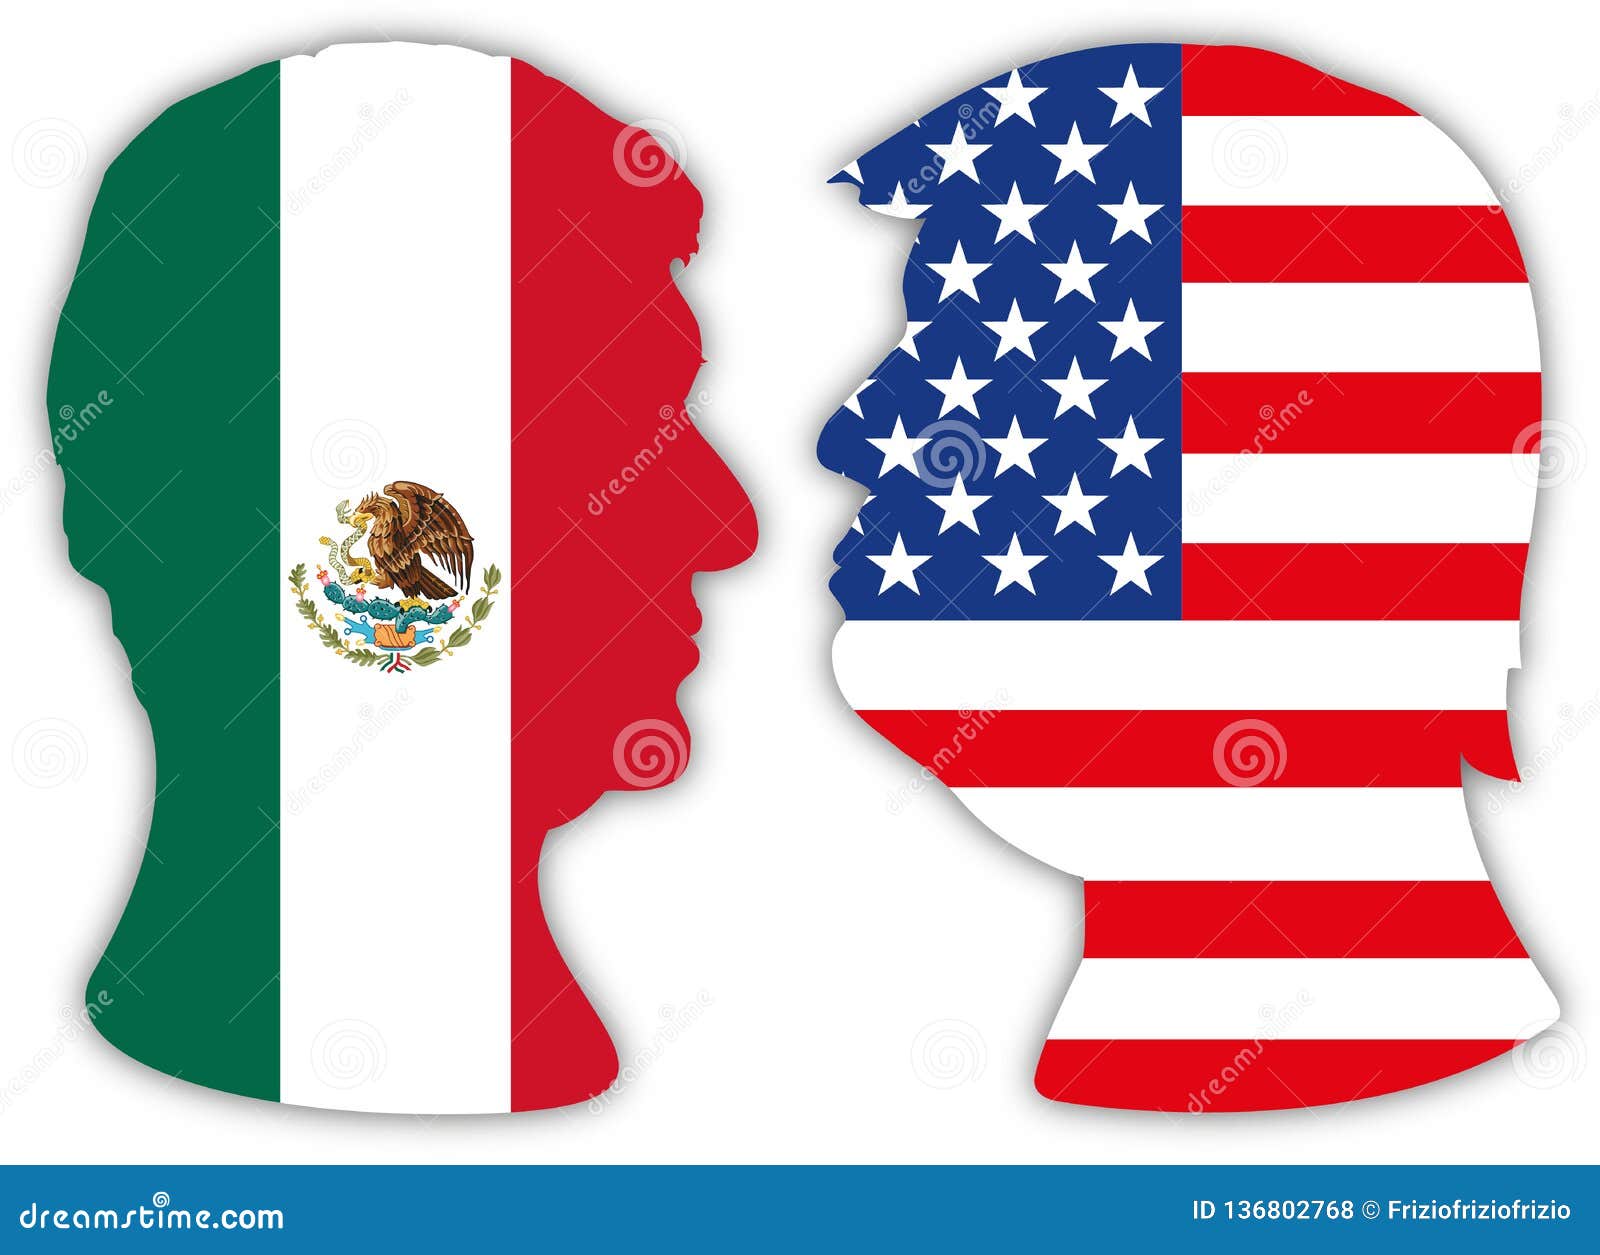 obrador and trump portraits silhouette with flags